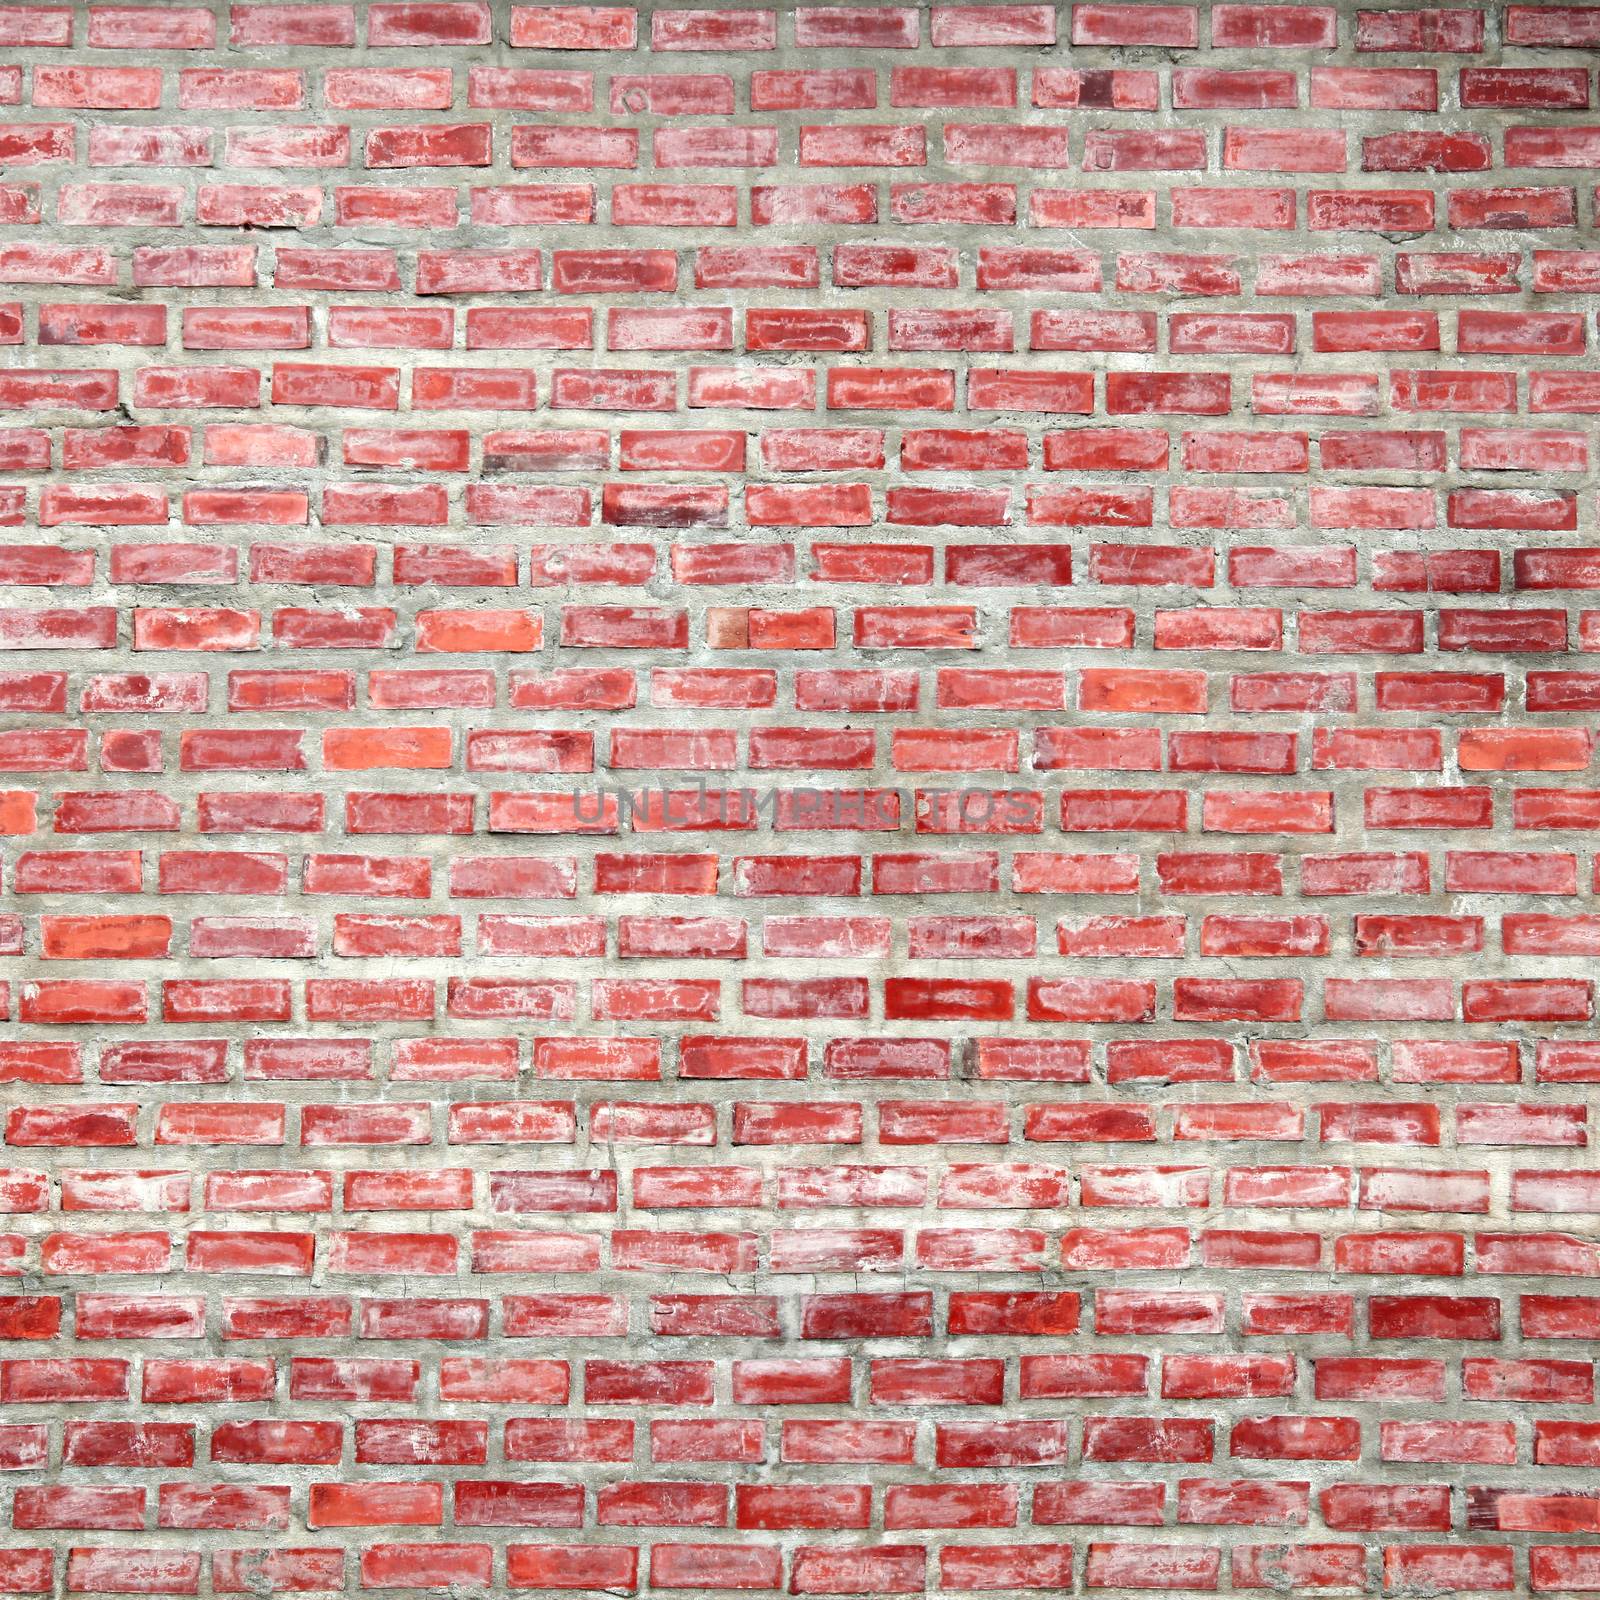 Brick Wall by antpkr